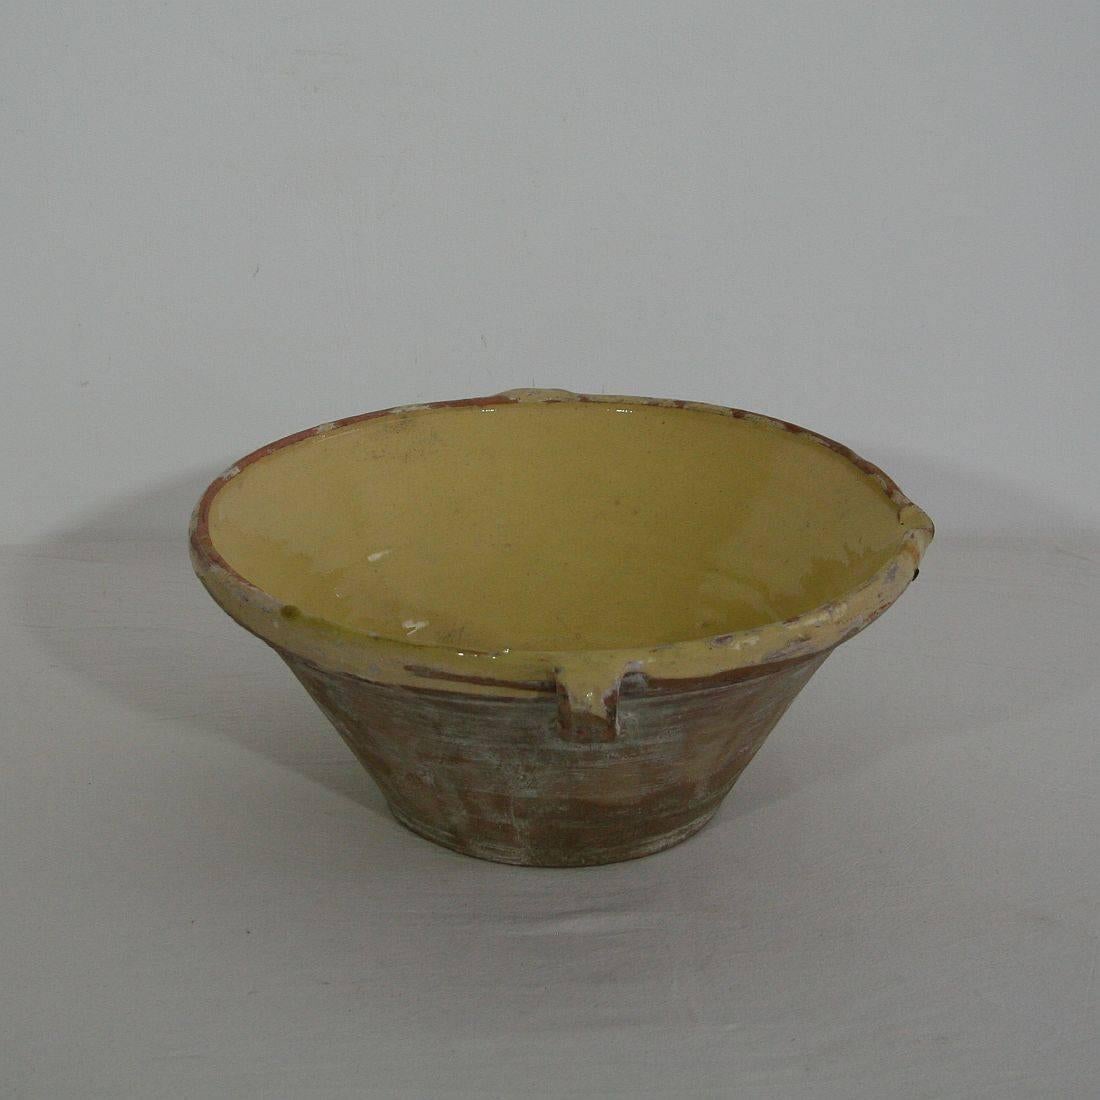 Other 19th Century French Glazed Terracotta Dairy Bowl or Tian